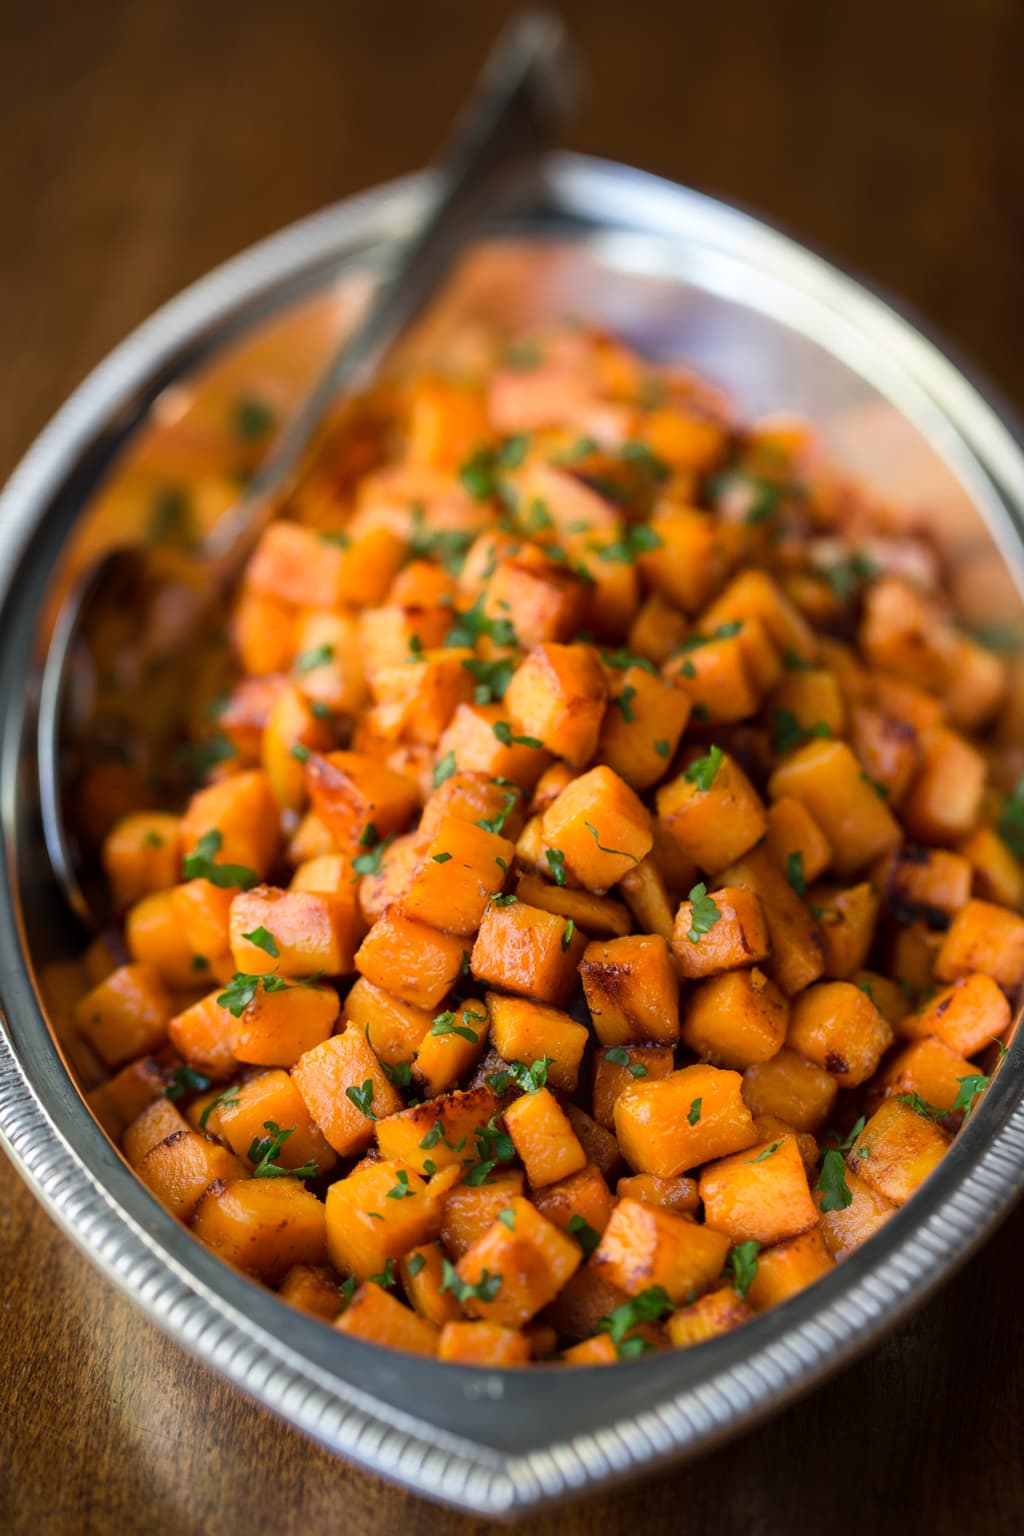 Vertical close up photo of Caramelized Sweet Potatoes in a silver presentation platter.